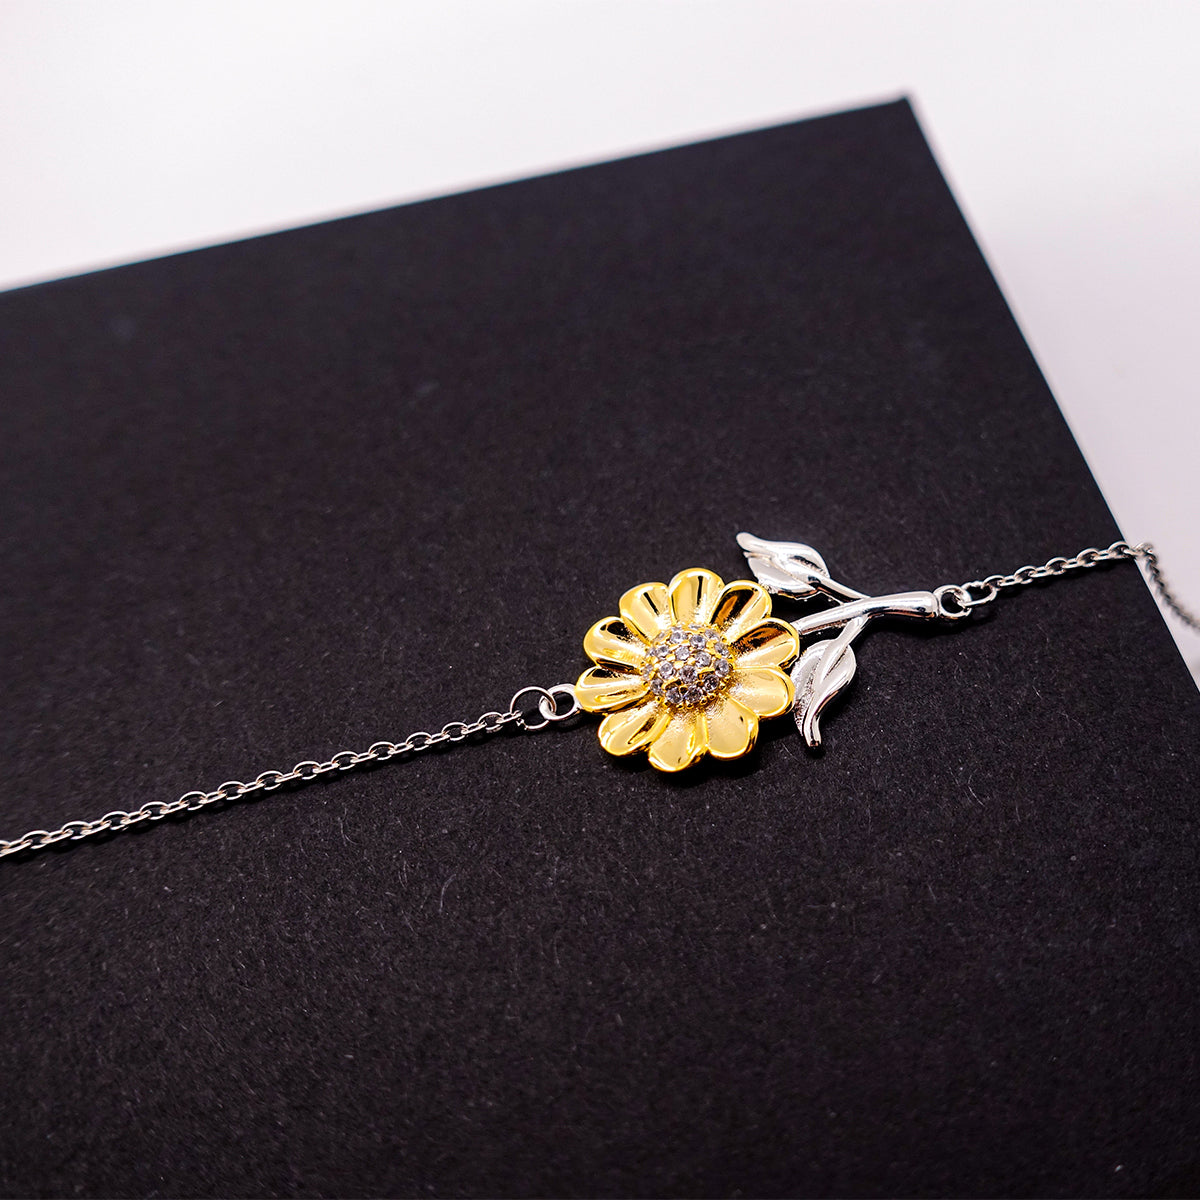 Son In Law Motivational Gifts from Mother In Law, Remember to never give up no matter what, Inspirational Birthday Sunflower Bracelet for Son In Law